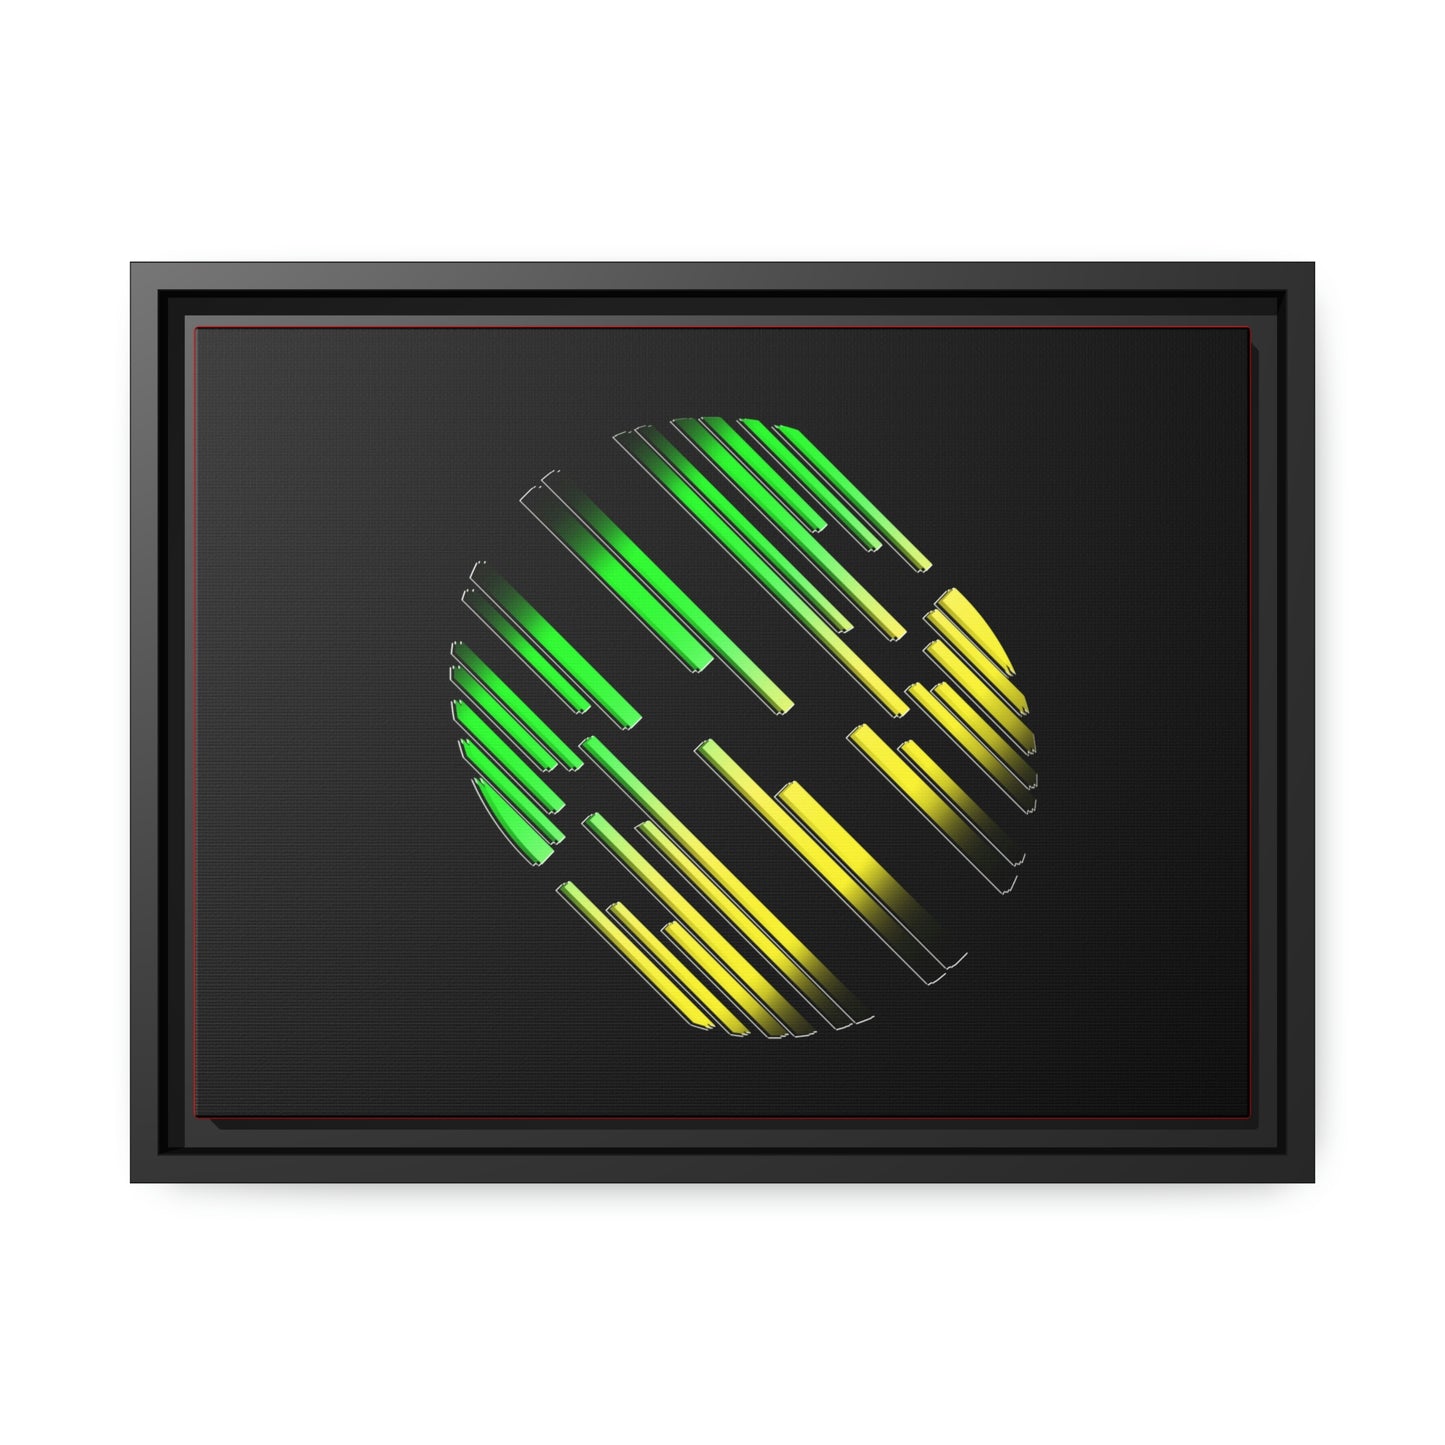 Digital Abstract Art with Jamaican Colors.